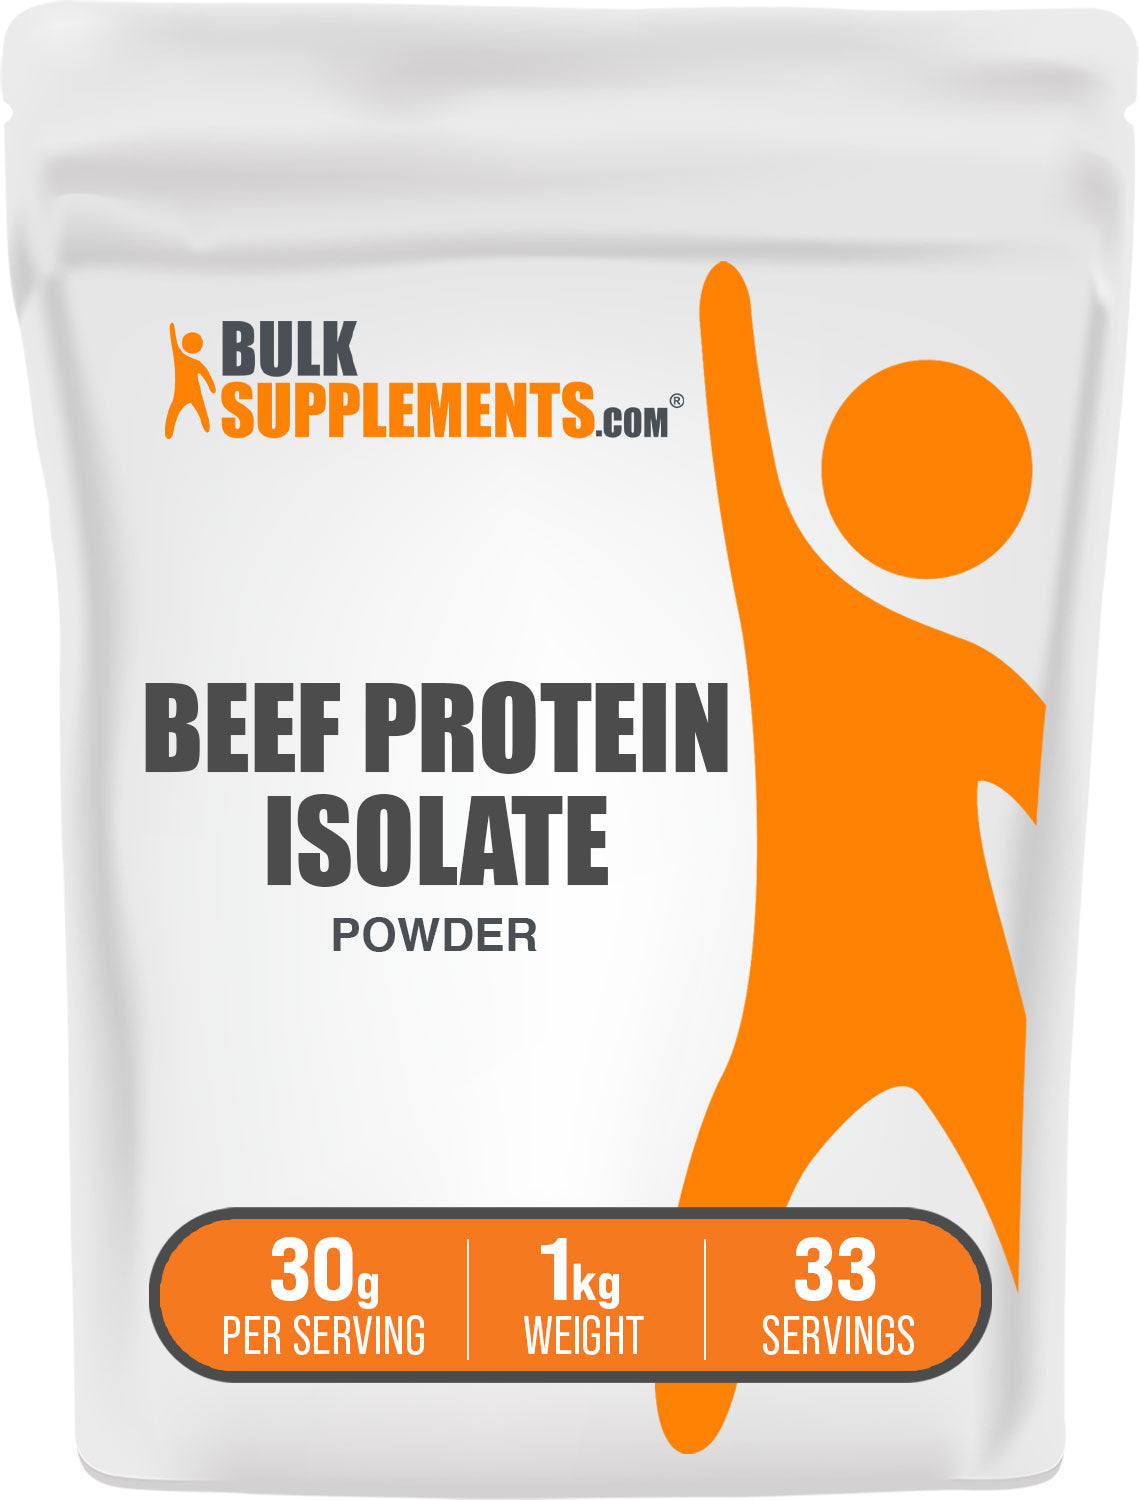 BulkSupplements.com Beef Protein Isolate powder bag 1kg